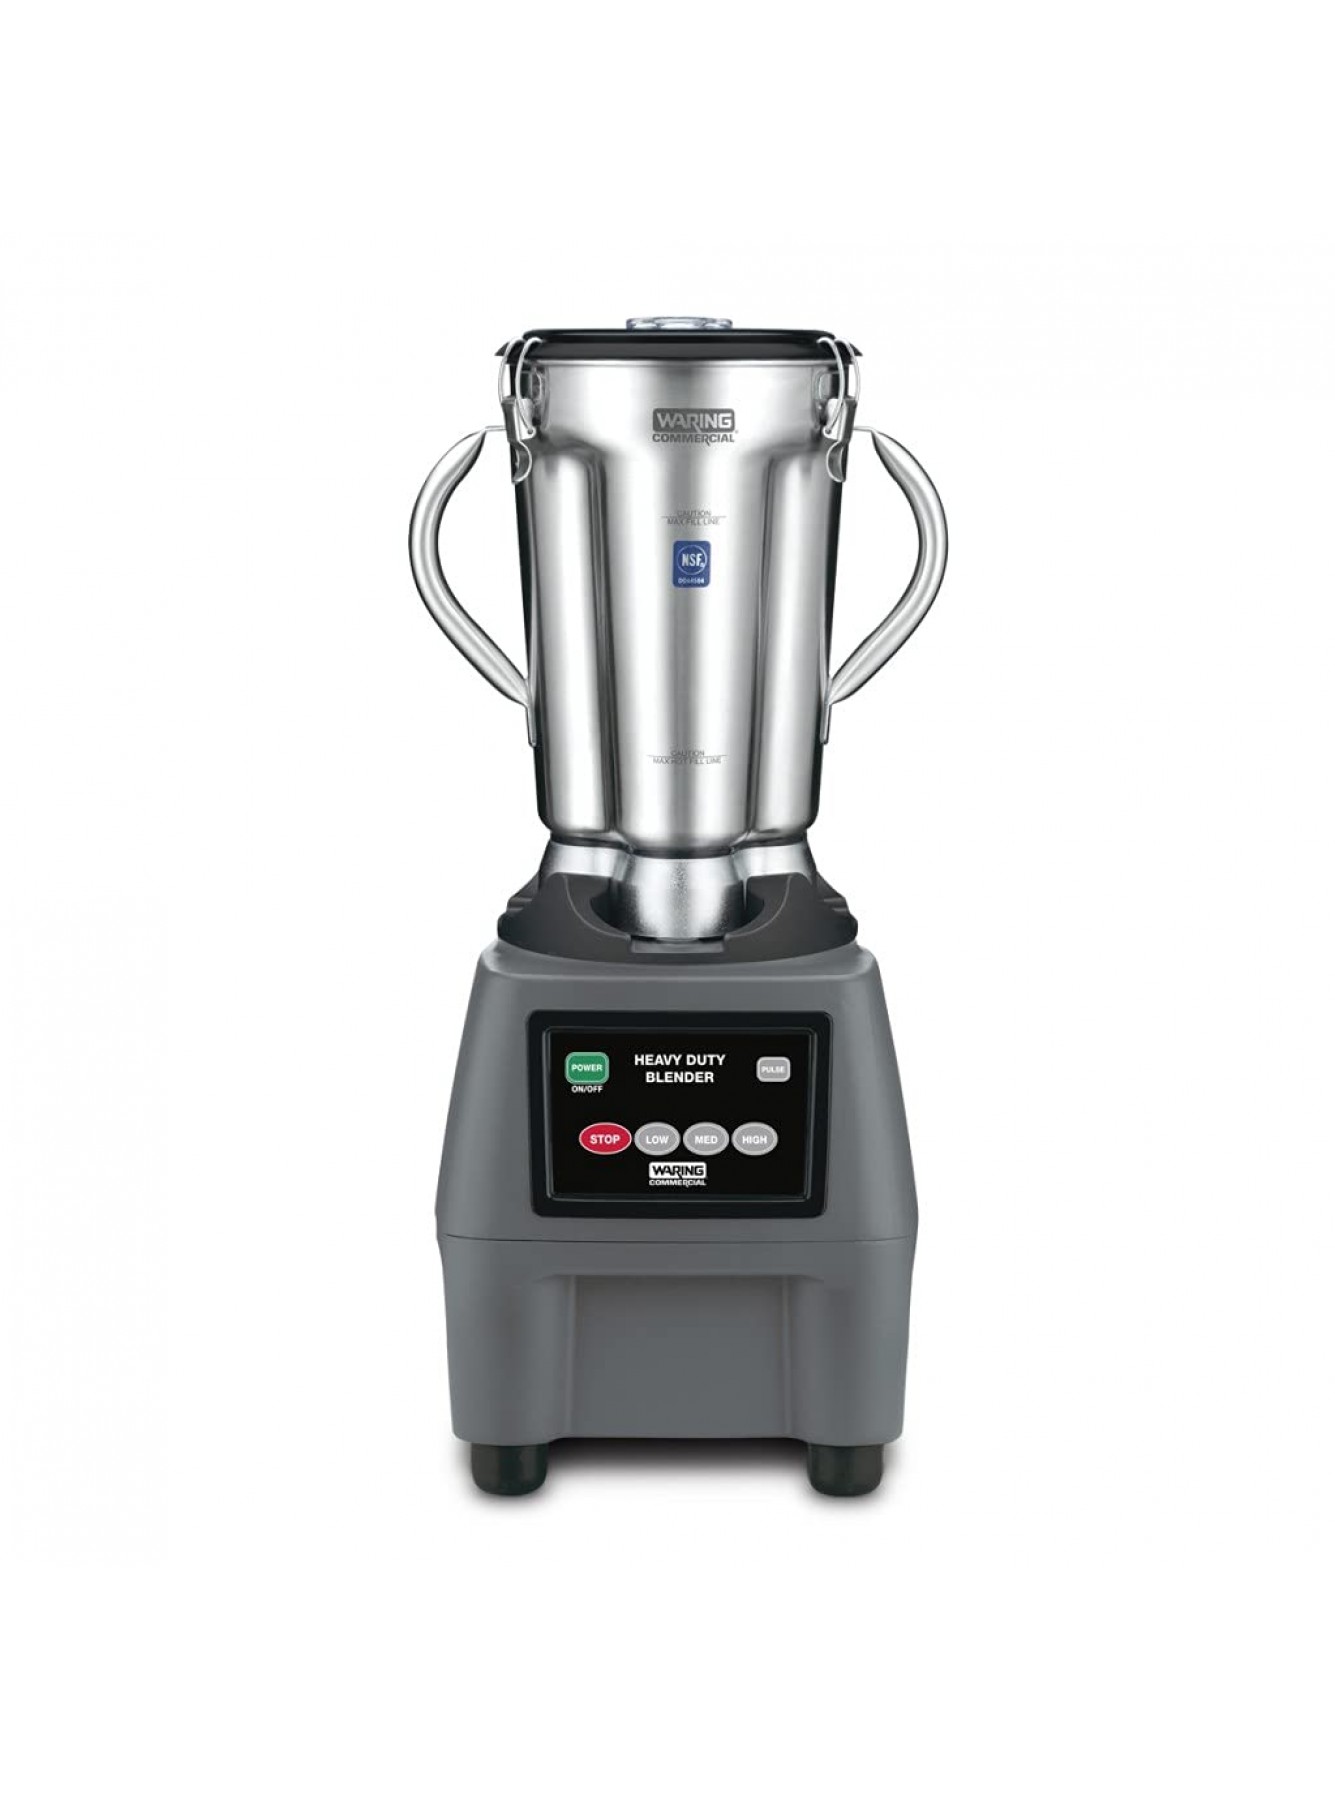 Waring Commercial CB15 Ultra Heavy Duty 3.75 HP Blender Electric Touchpad Controls with Stainless Steel 1 Gallon Container 120V 5-15 Phase Plug B000E6A1T0